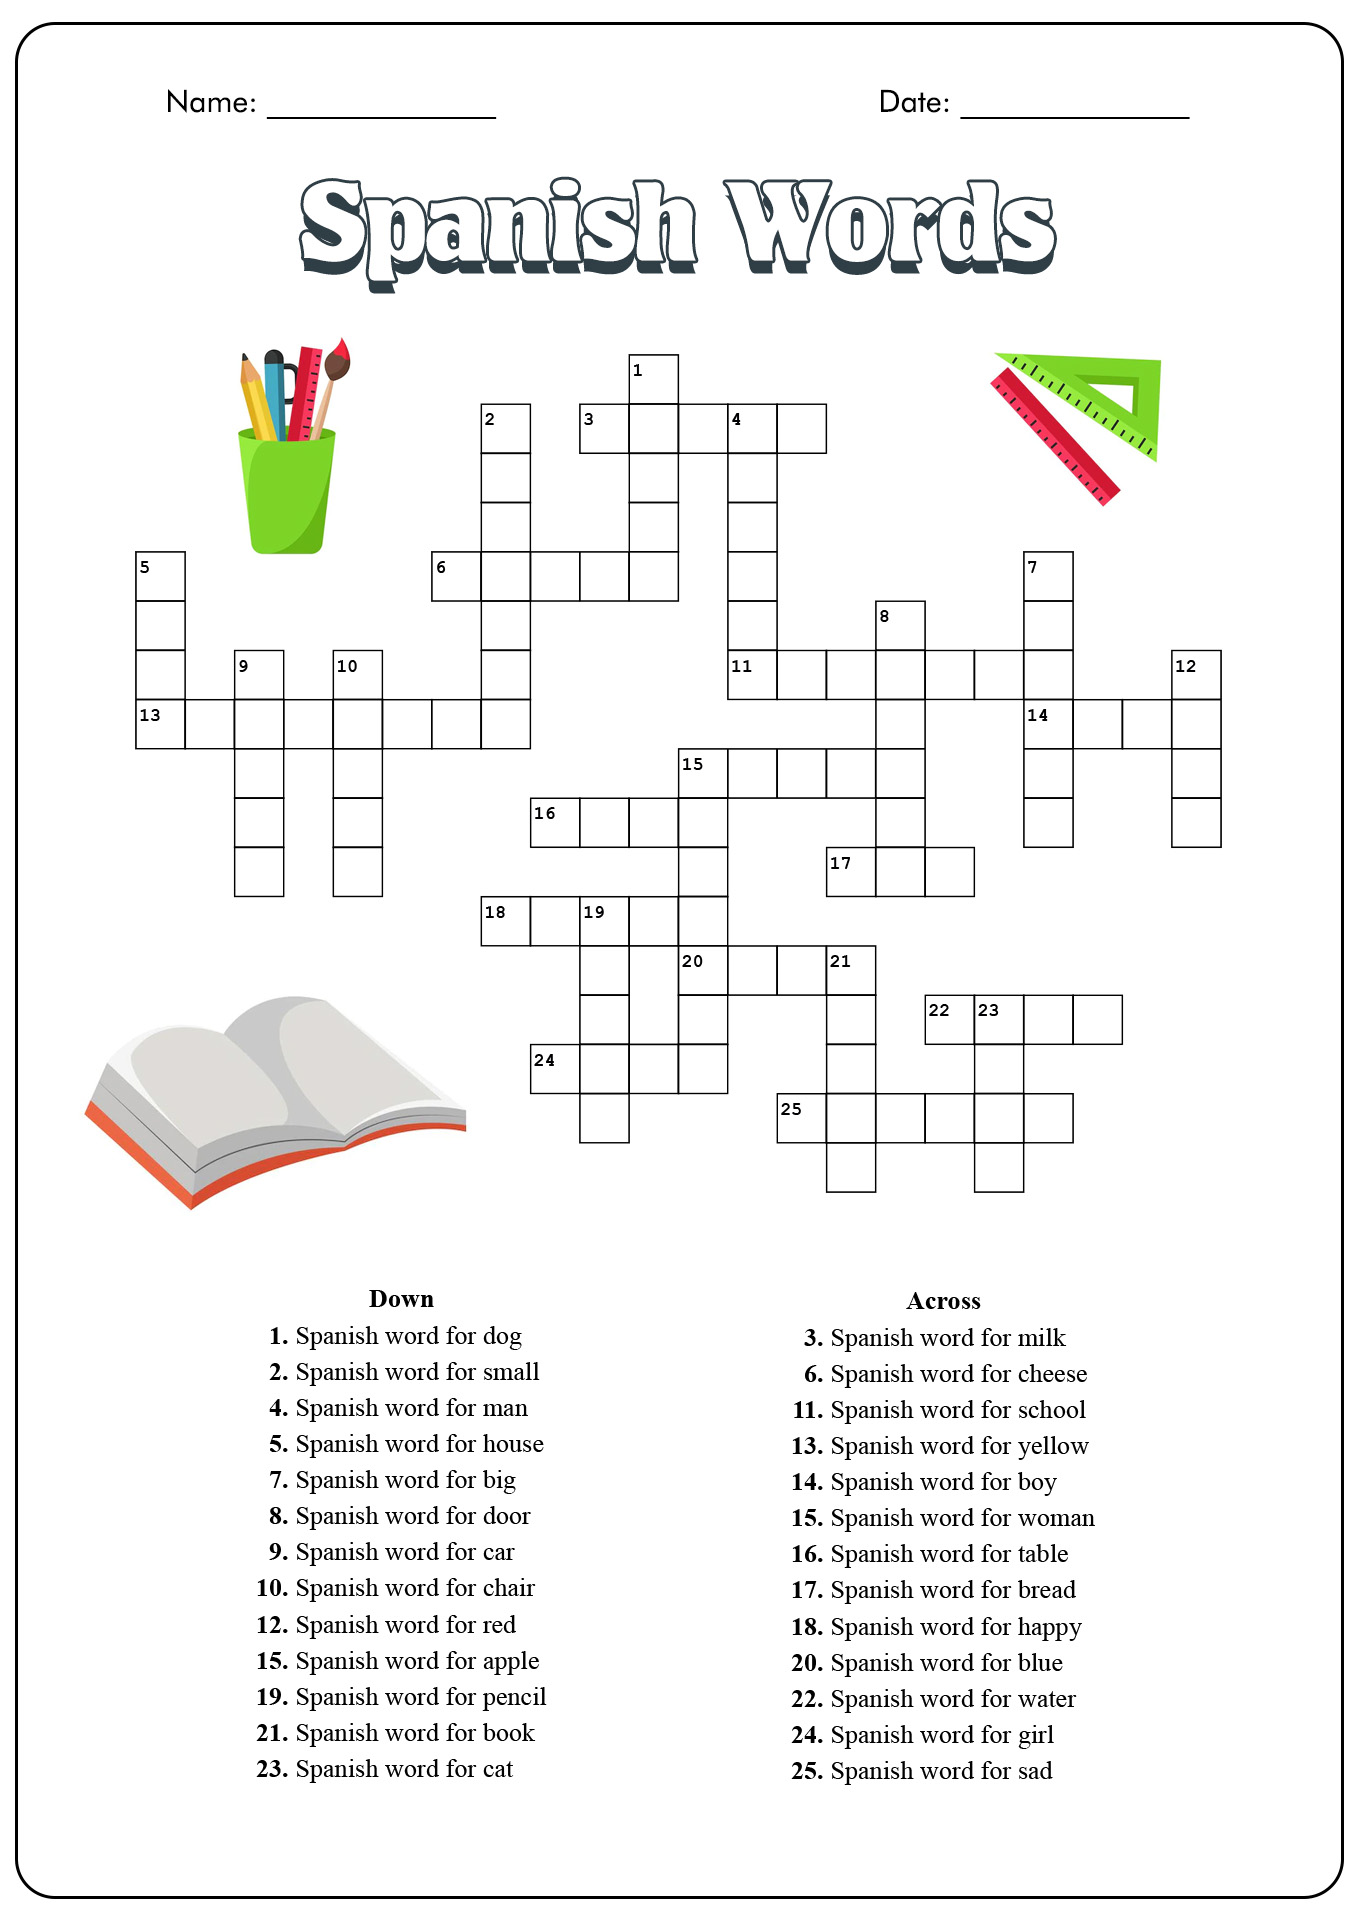 free-printable-spanish-word-searches-printable-word-searches